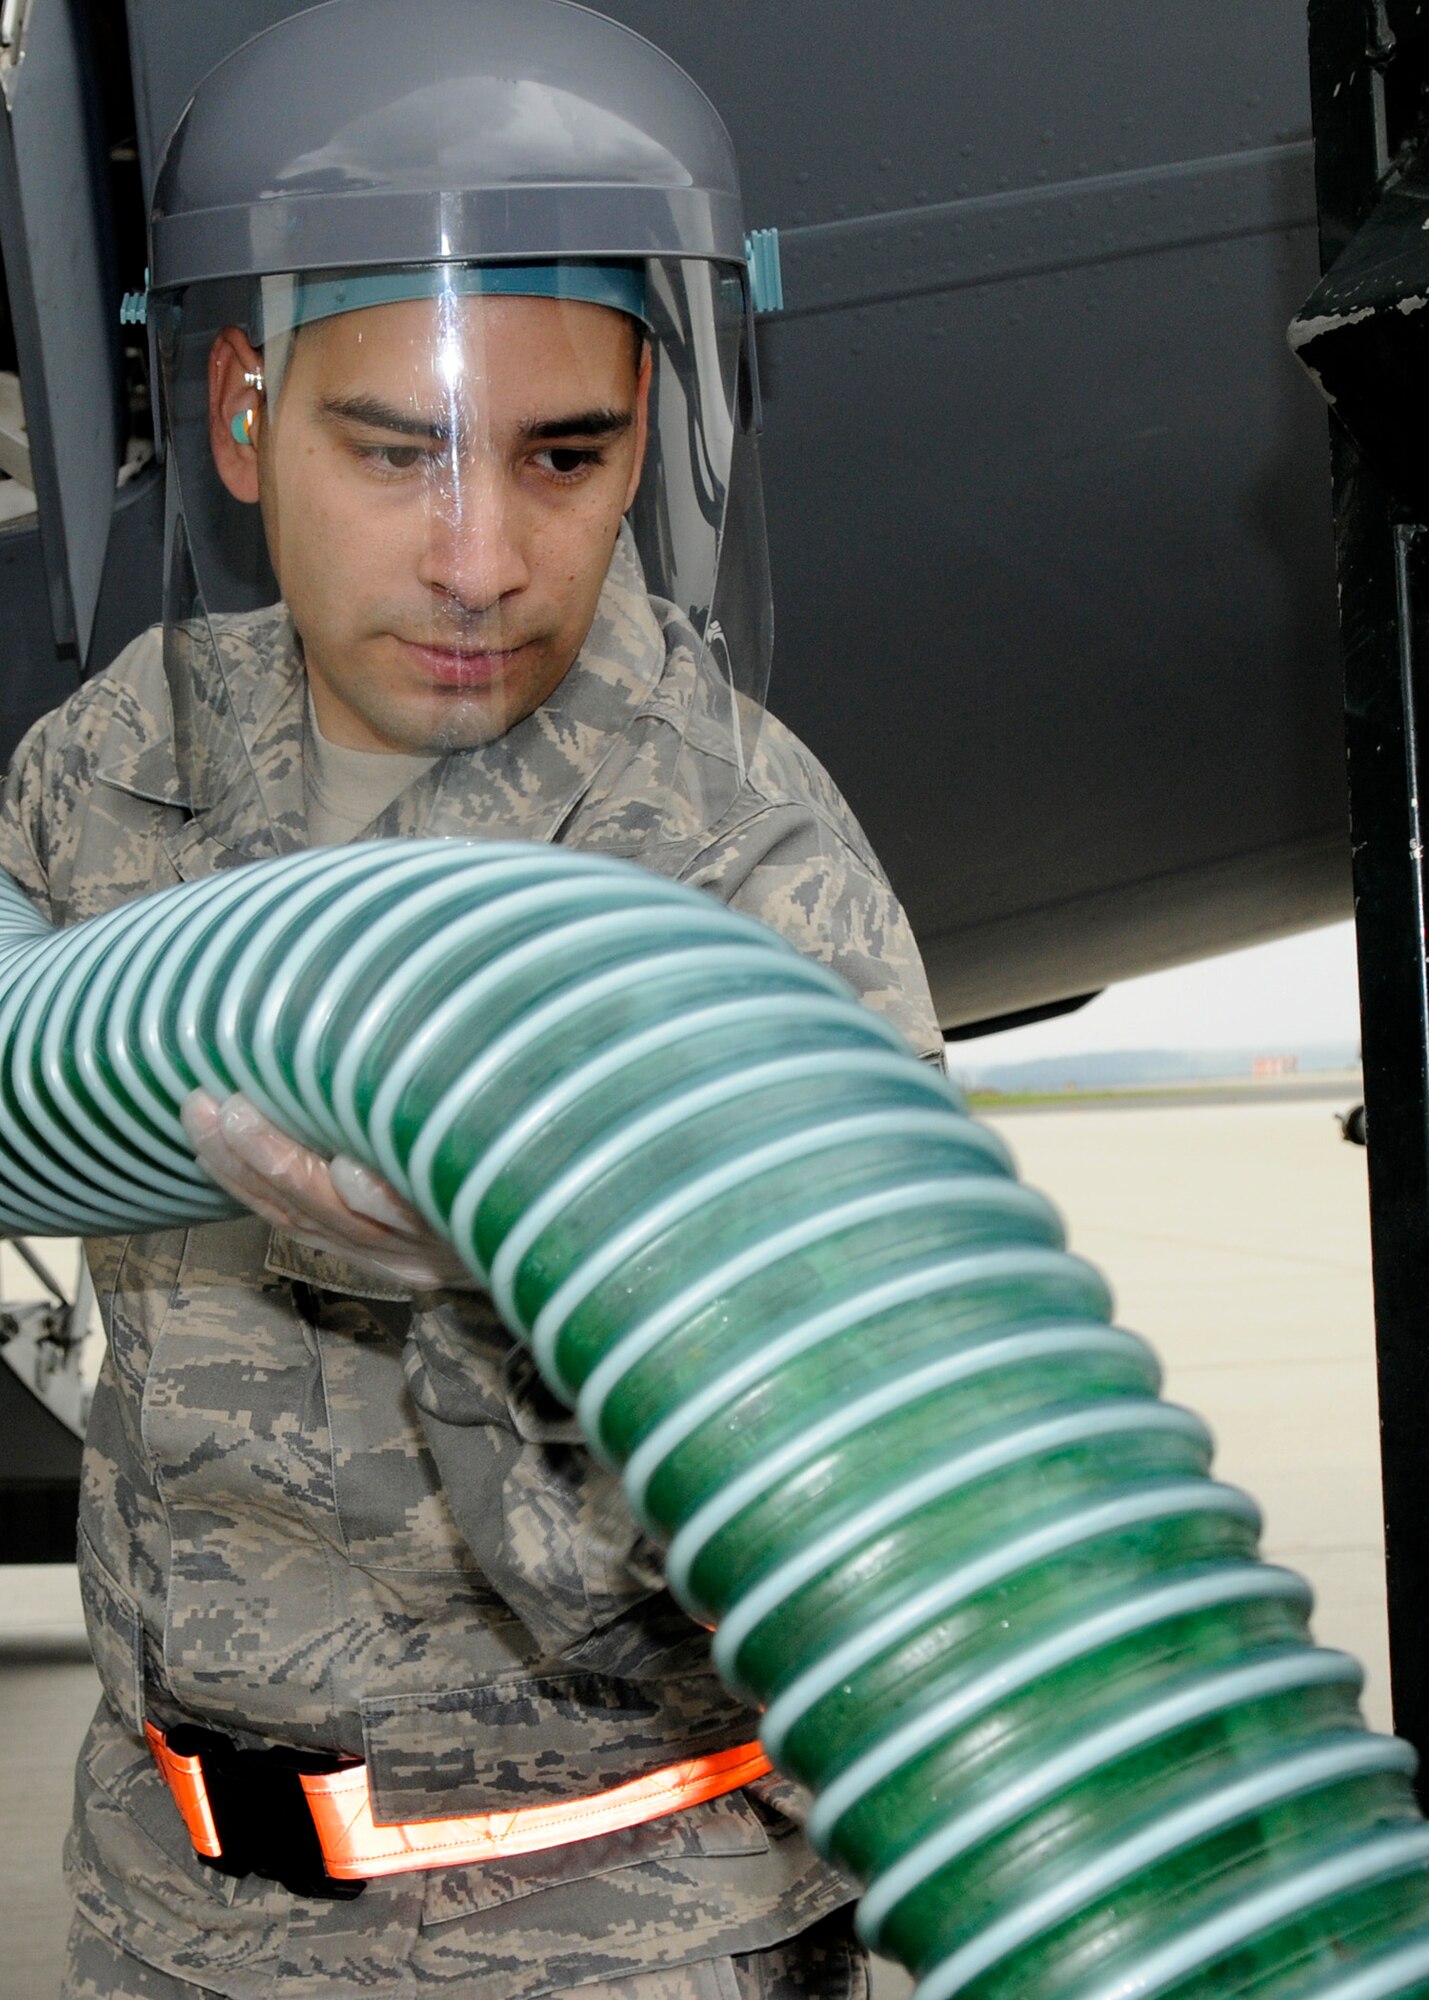 SPANGDAHLEM AIR BASE, Germany – Staff Sgt. Jesus Macias, 726th Aircraft Mobility Squadron air transportation journeyman, positions the waste hose during a routine latrine service on a C-17 Globemaster Aug 13. (U.S. Air Force photo by Airman 1st Class Staci Miller)